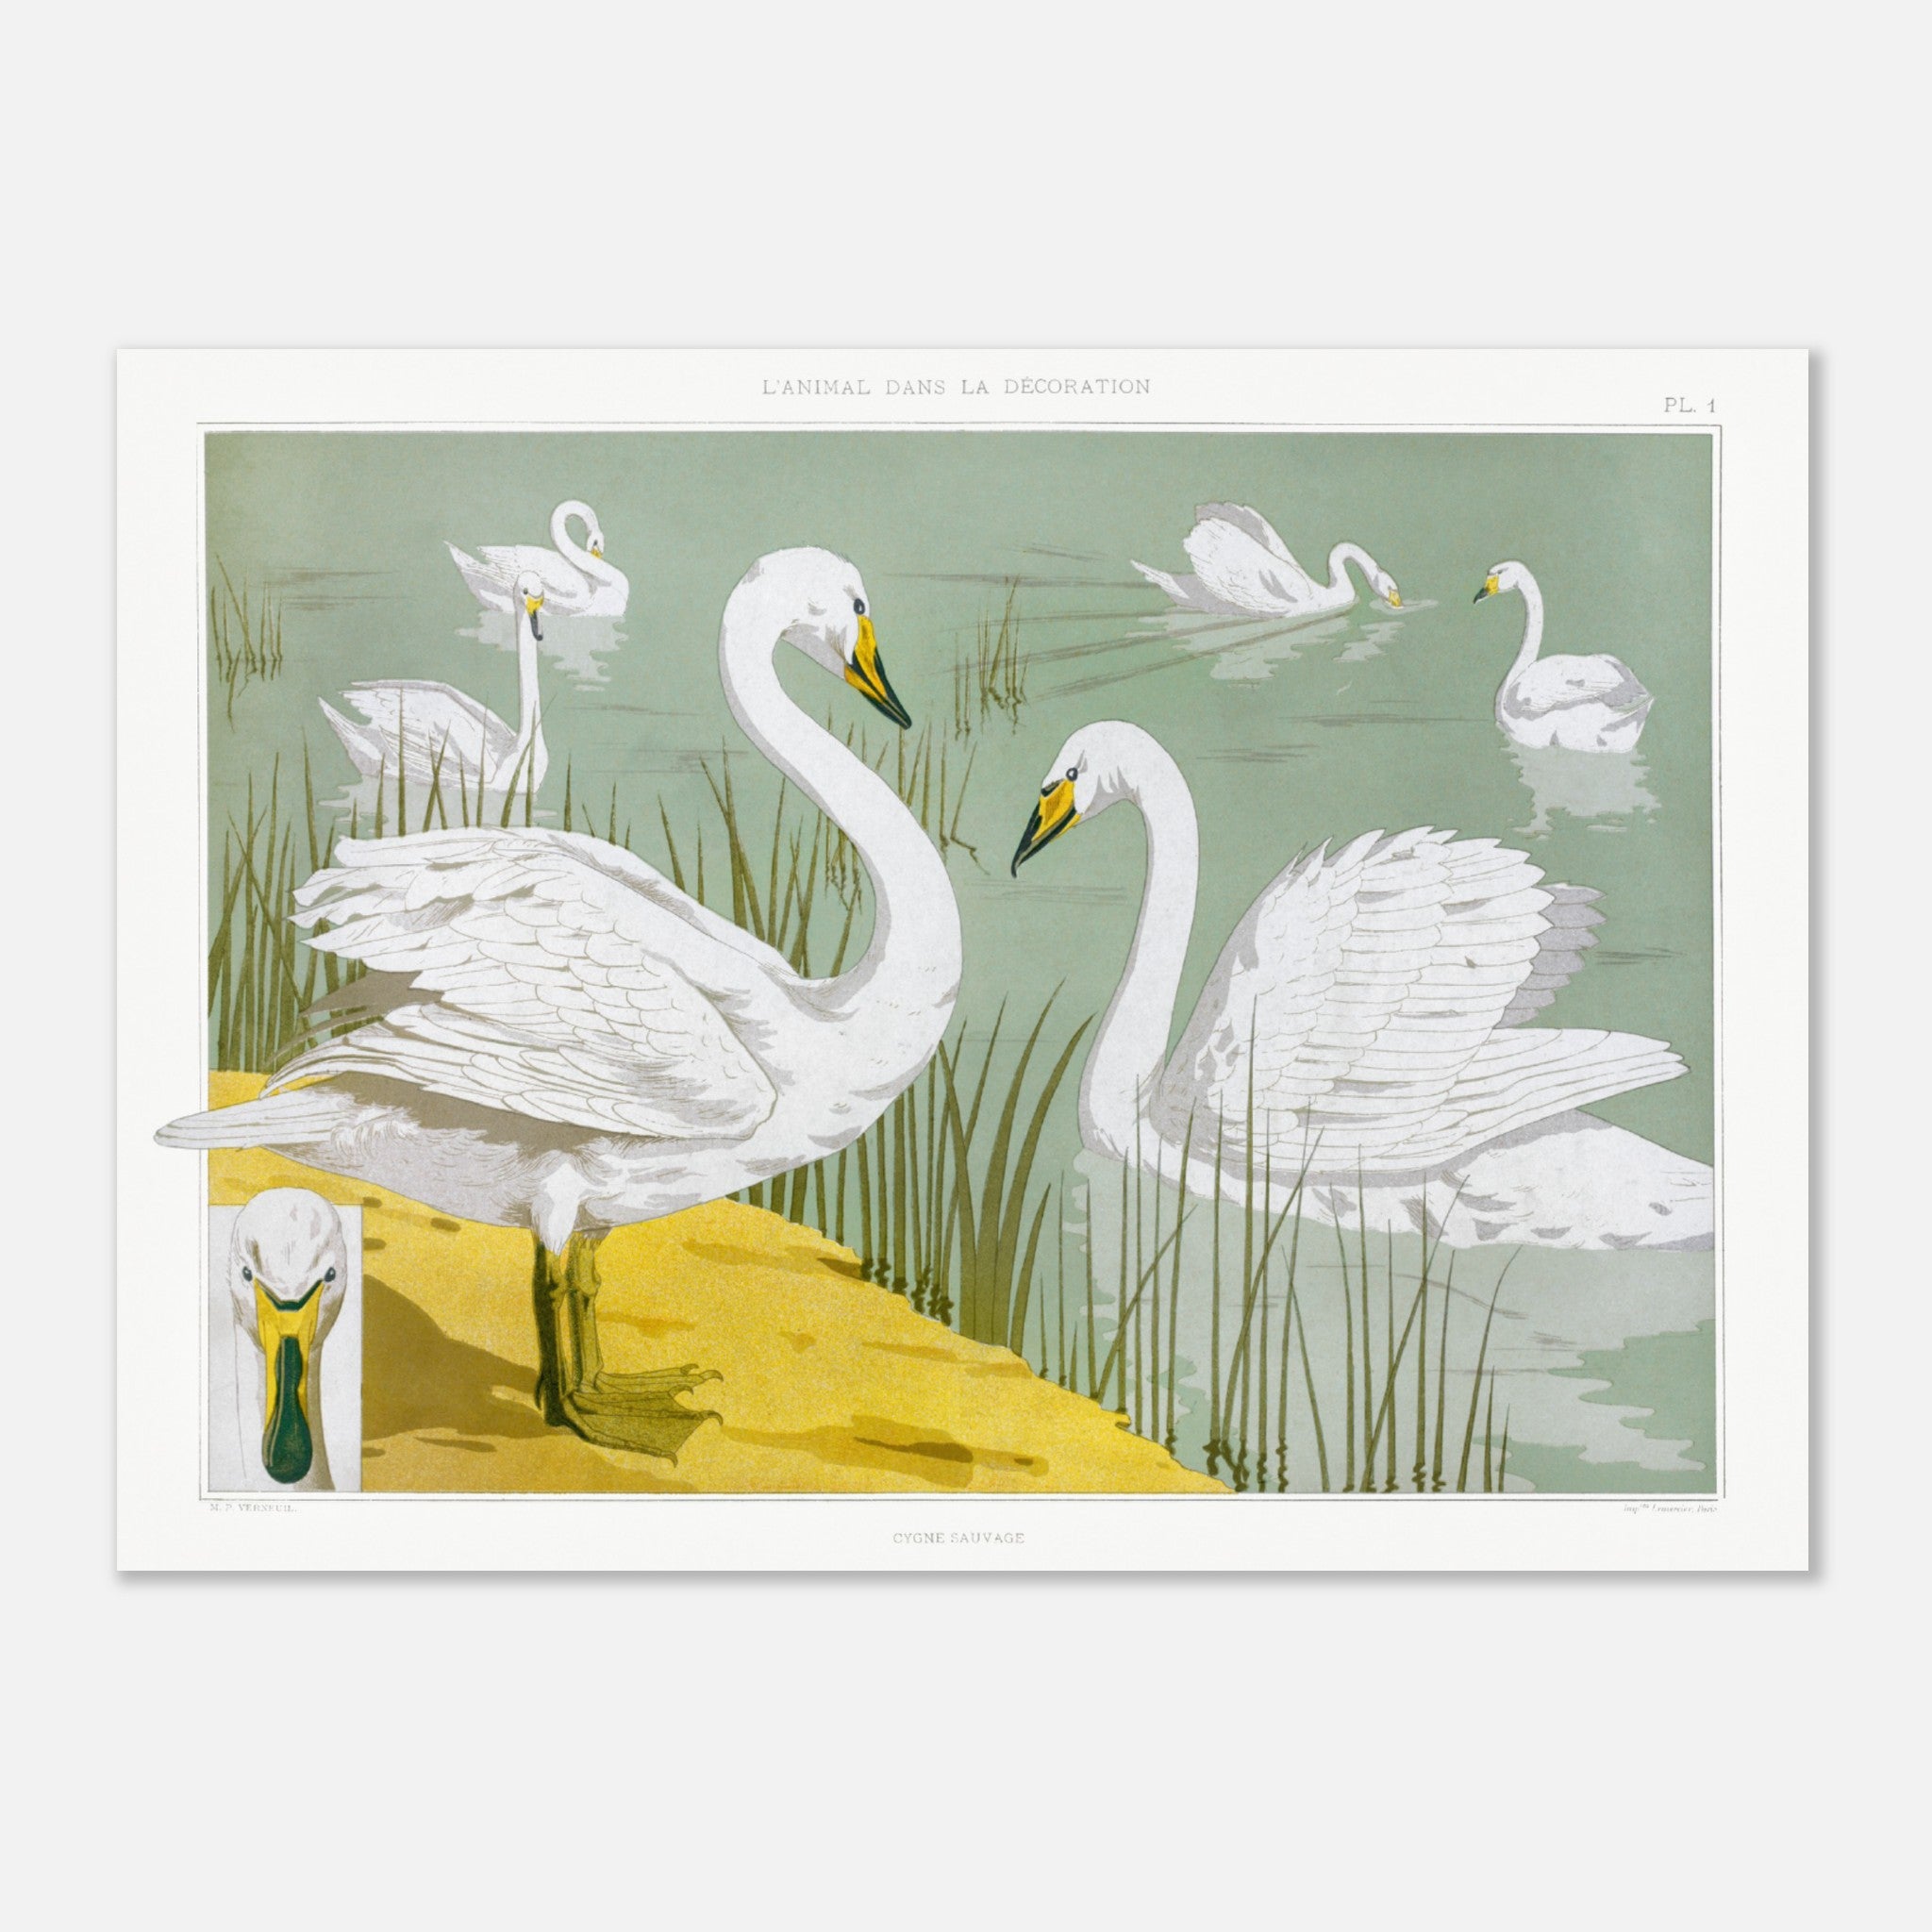 Verneuil - Cygne sauvage Poster